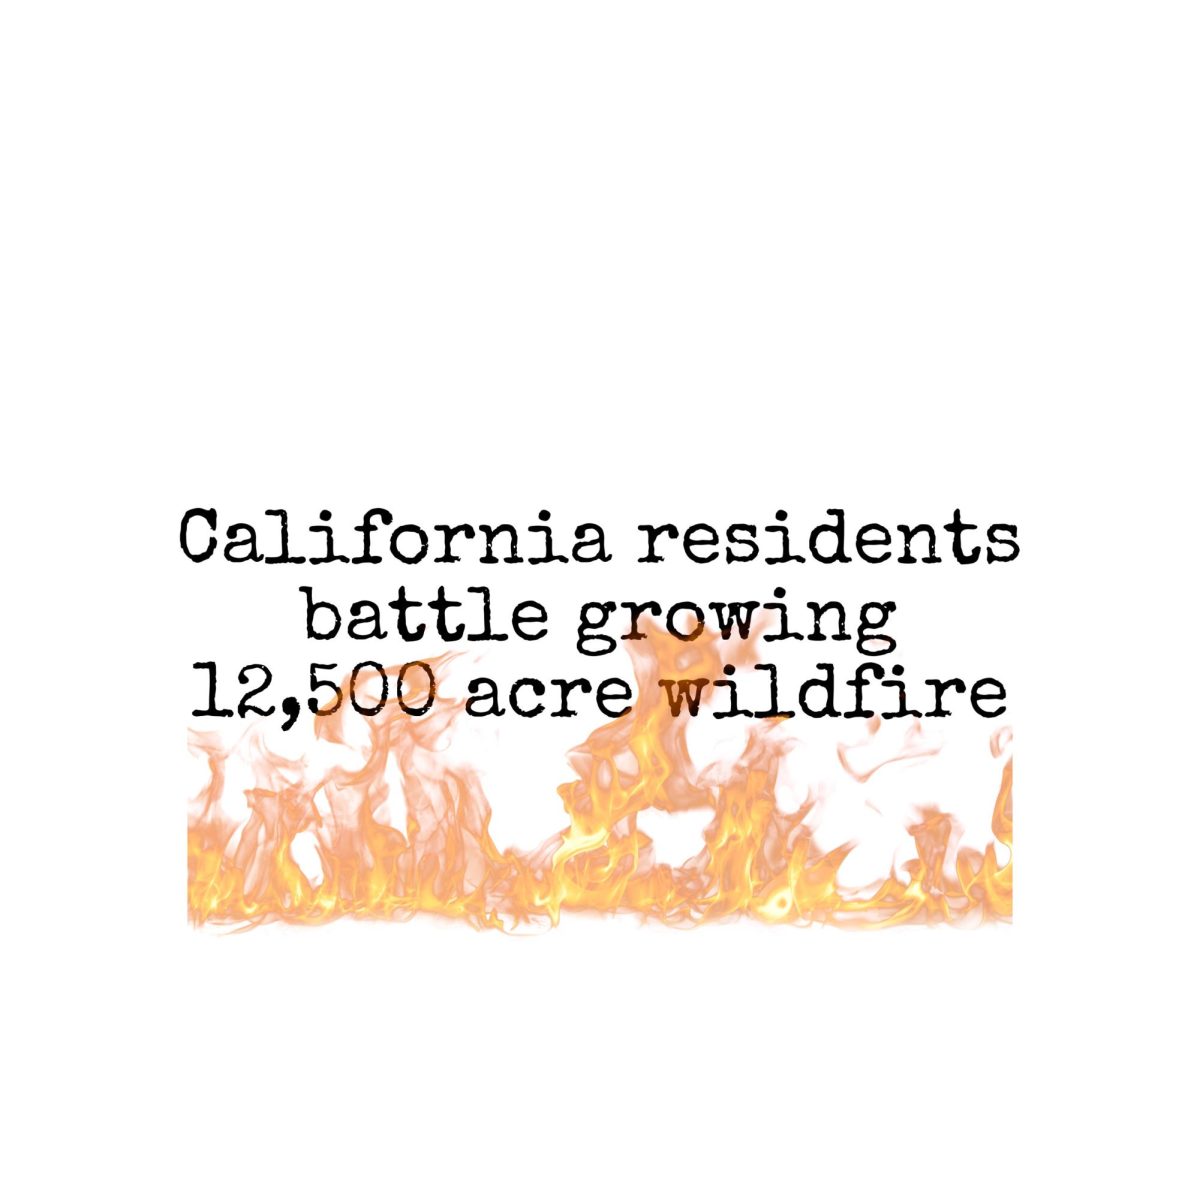 California residents battle growing 12,500 acre wildfire